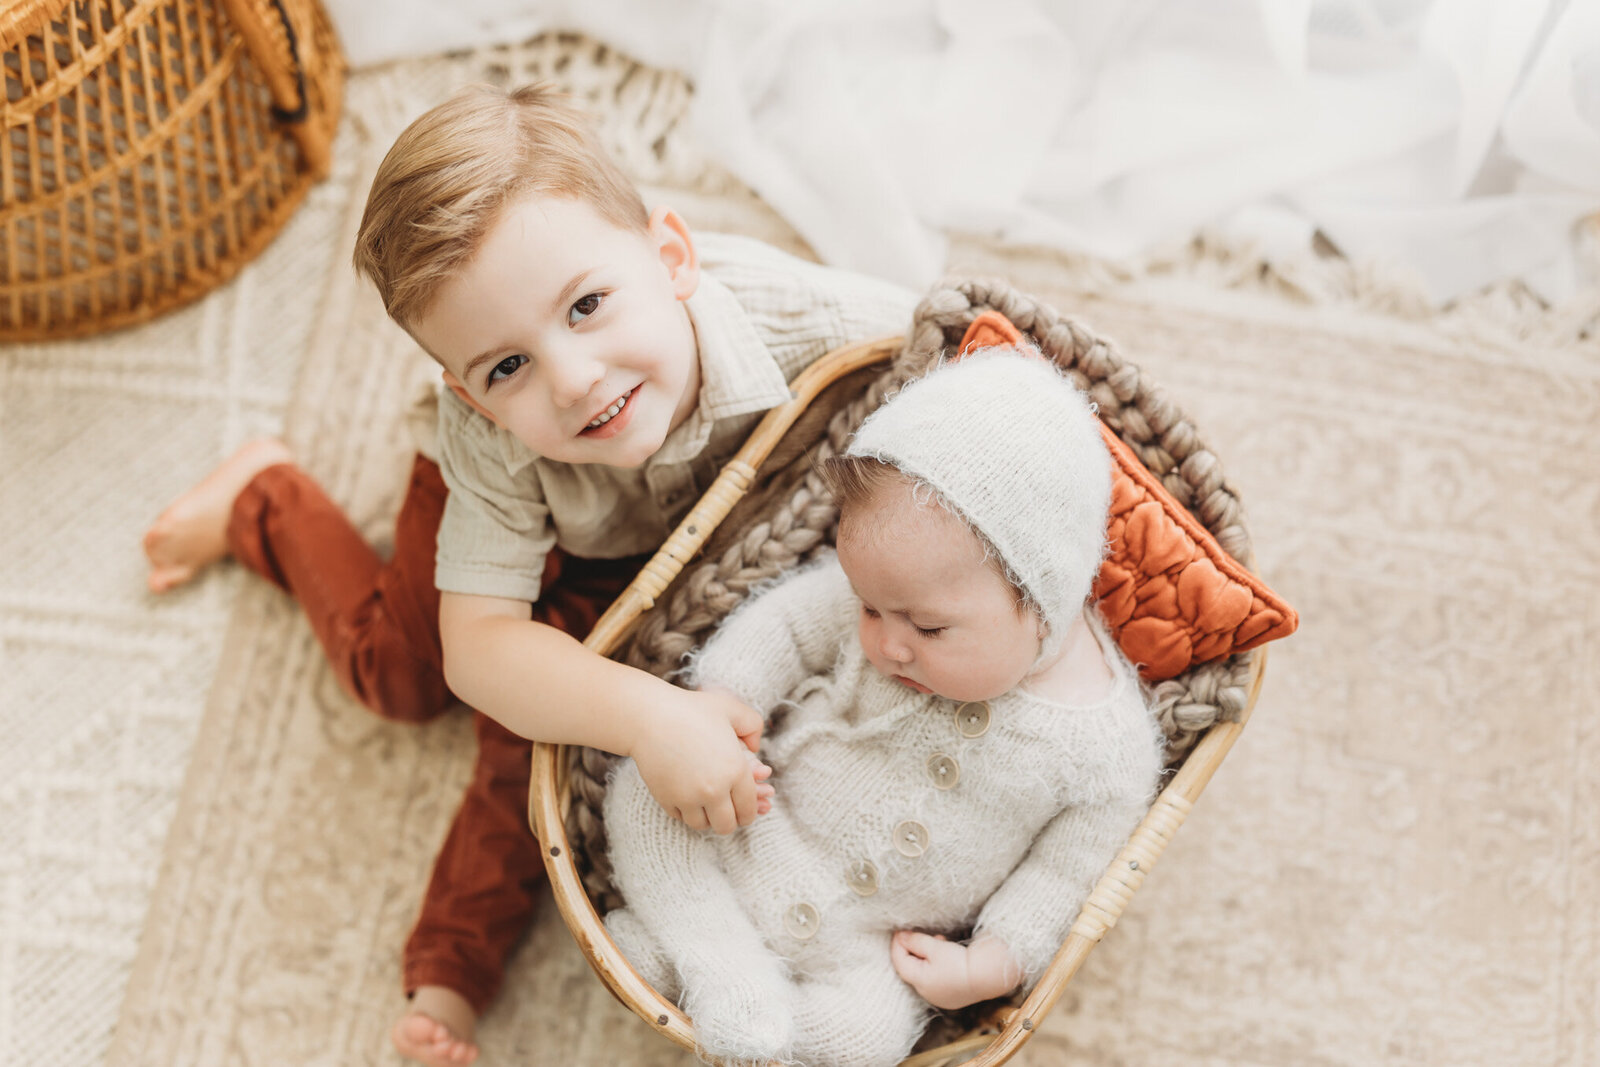 Toddler boy sitting next to newborn baby brother who is sleeping in a basket wearing a fuzzy bonnet and sleeper